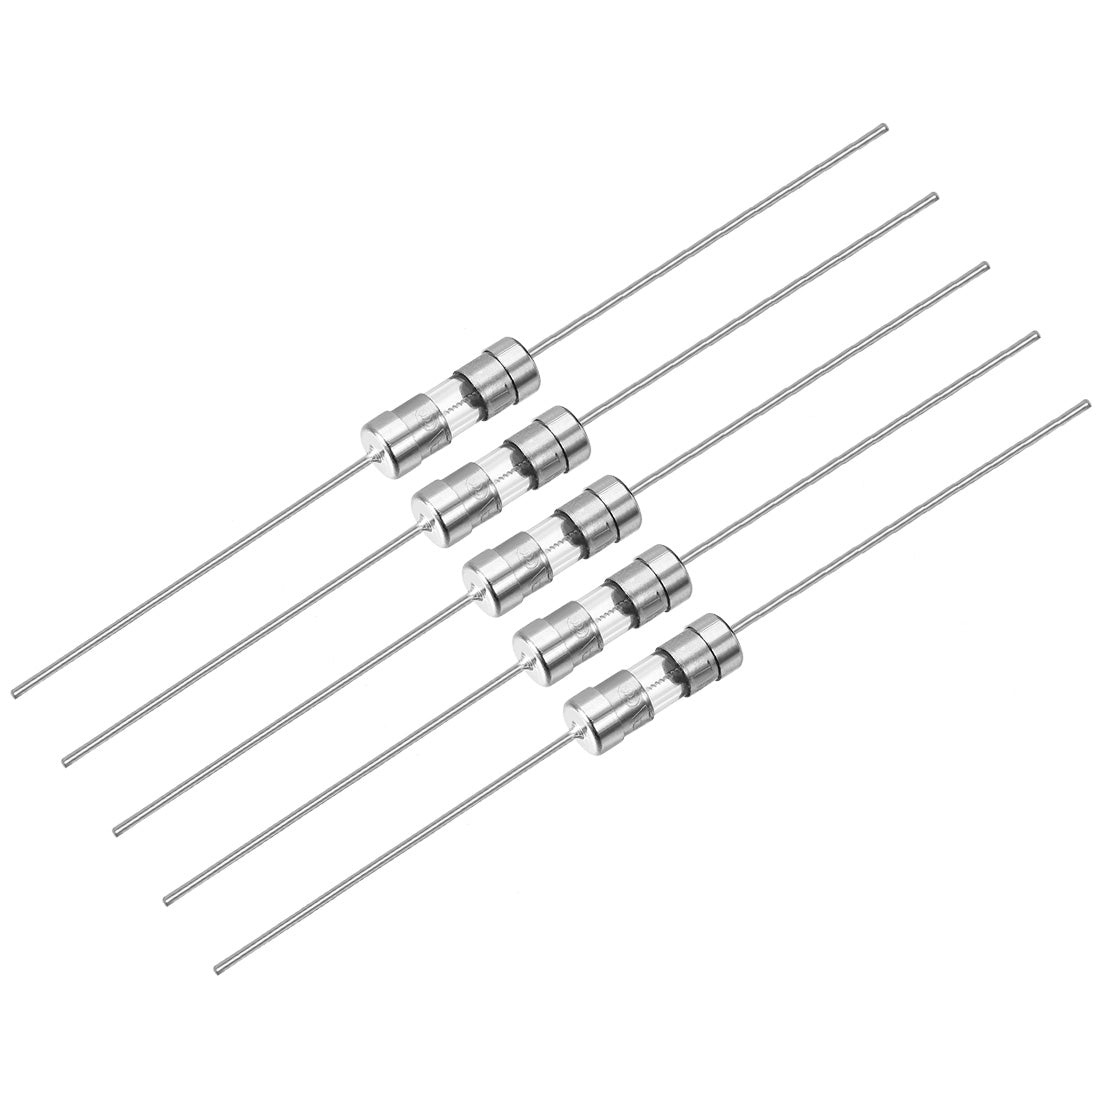 uxcell Uxcell Slow Blow Fuse Time Delay Axial Lead Glass Fuses 3.6mm x 10mm 250V T3.15A 5Pcs